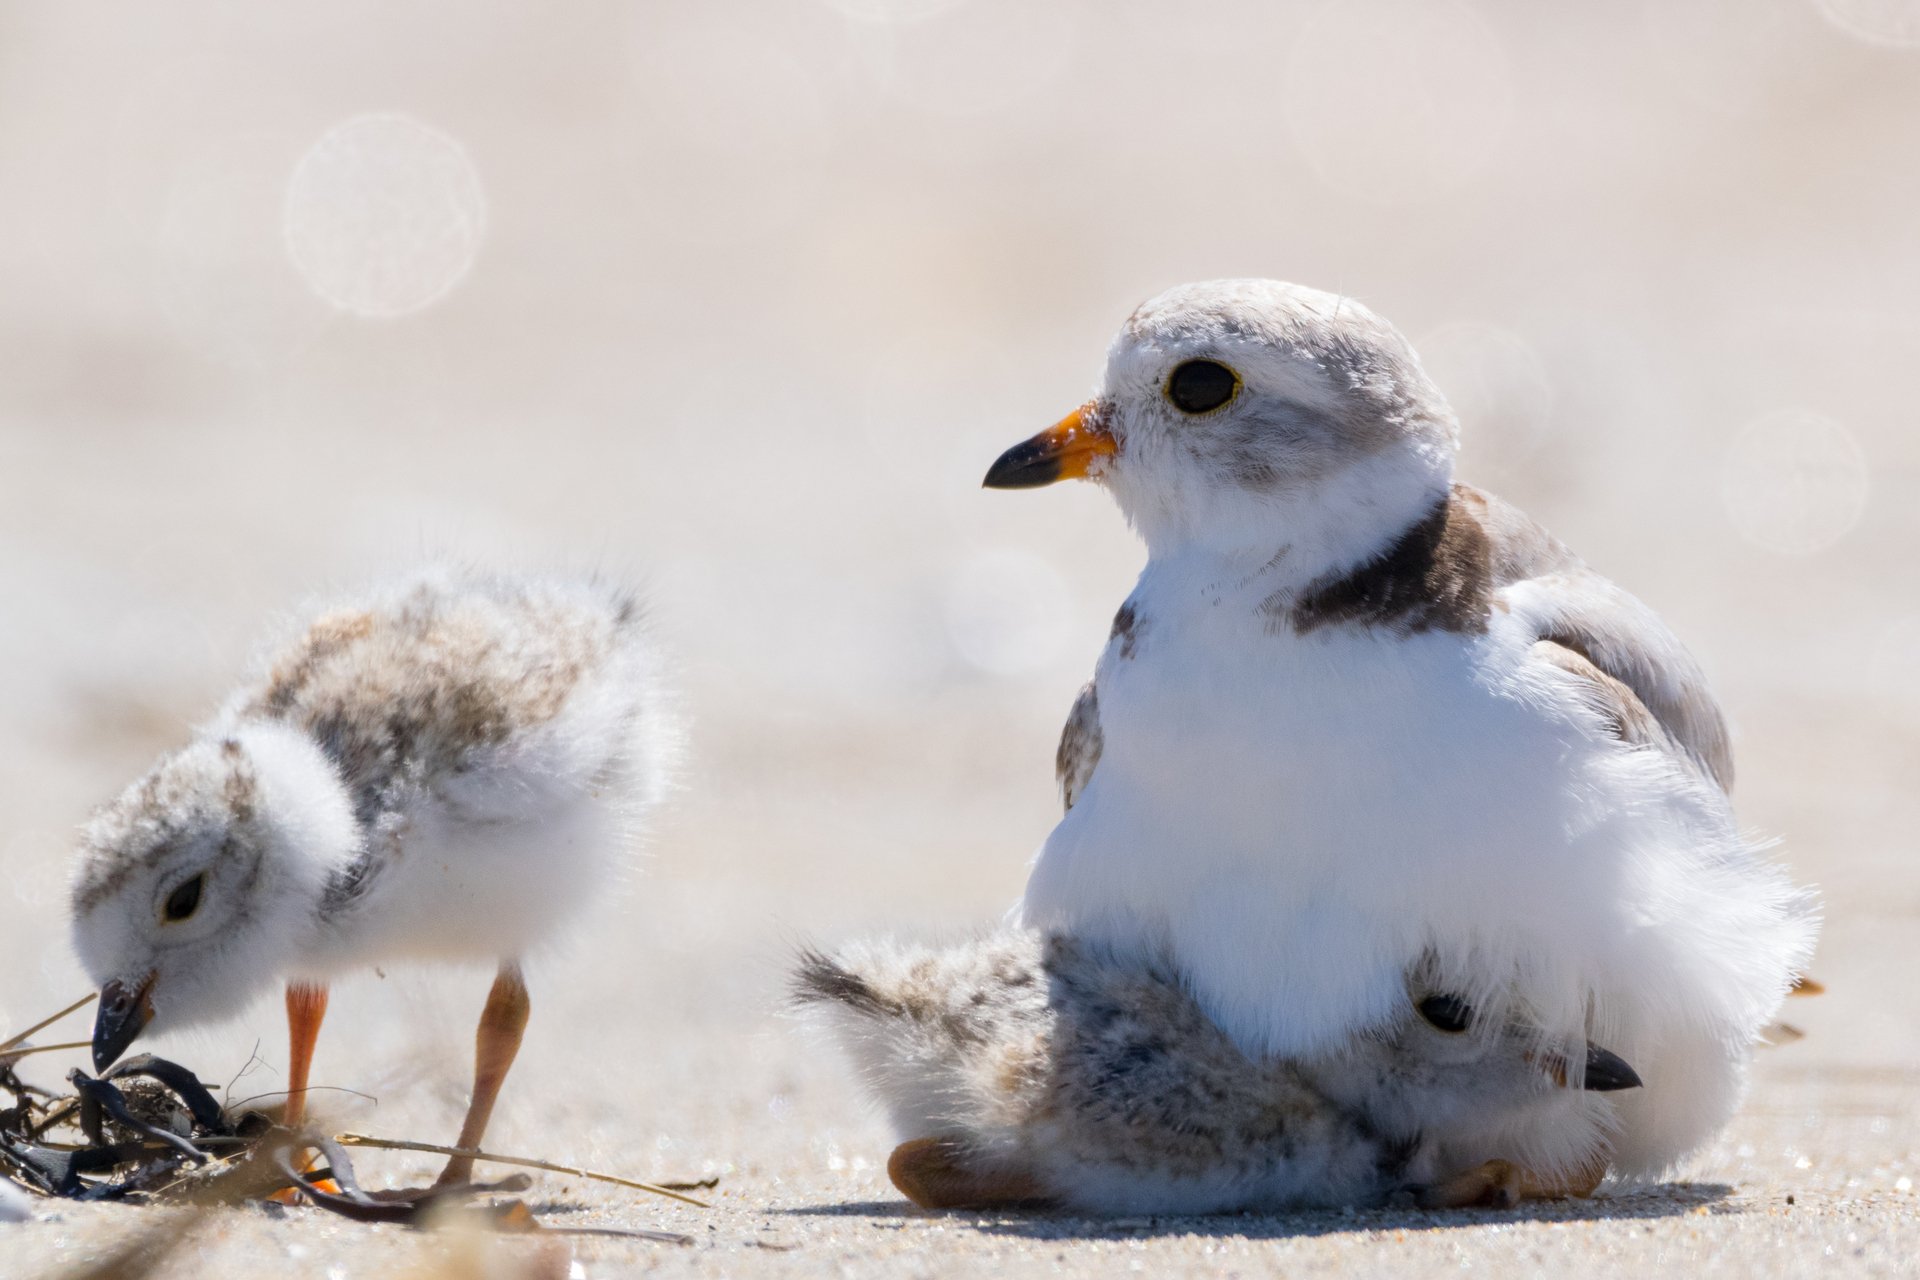 A Piping Plover sits on the the sand, with one chick nestled under her wing and another pecked at a pile of sticks